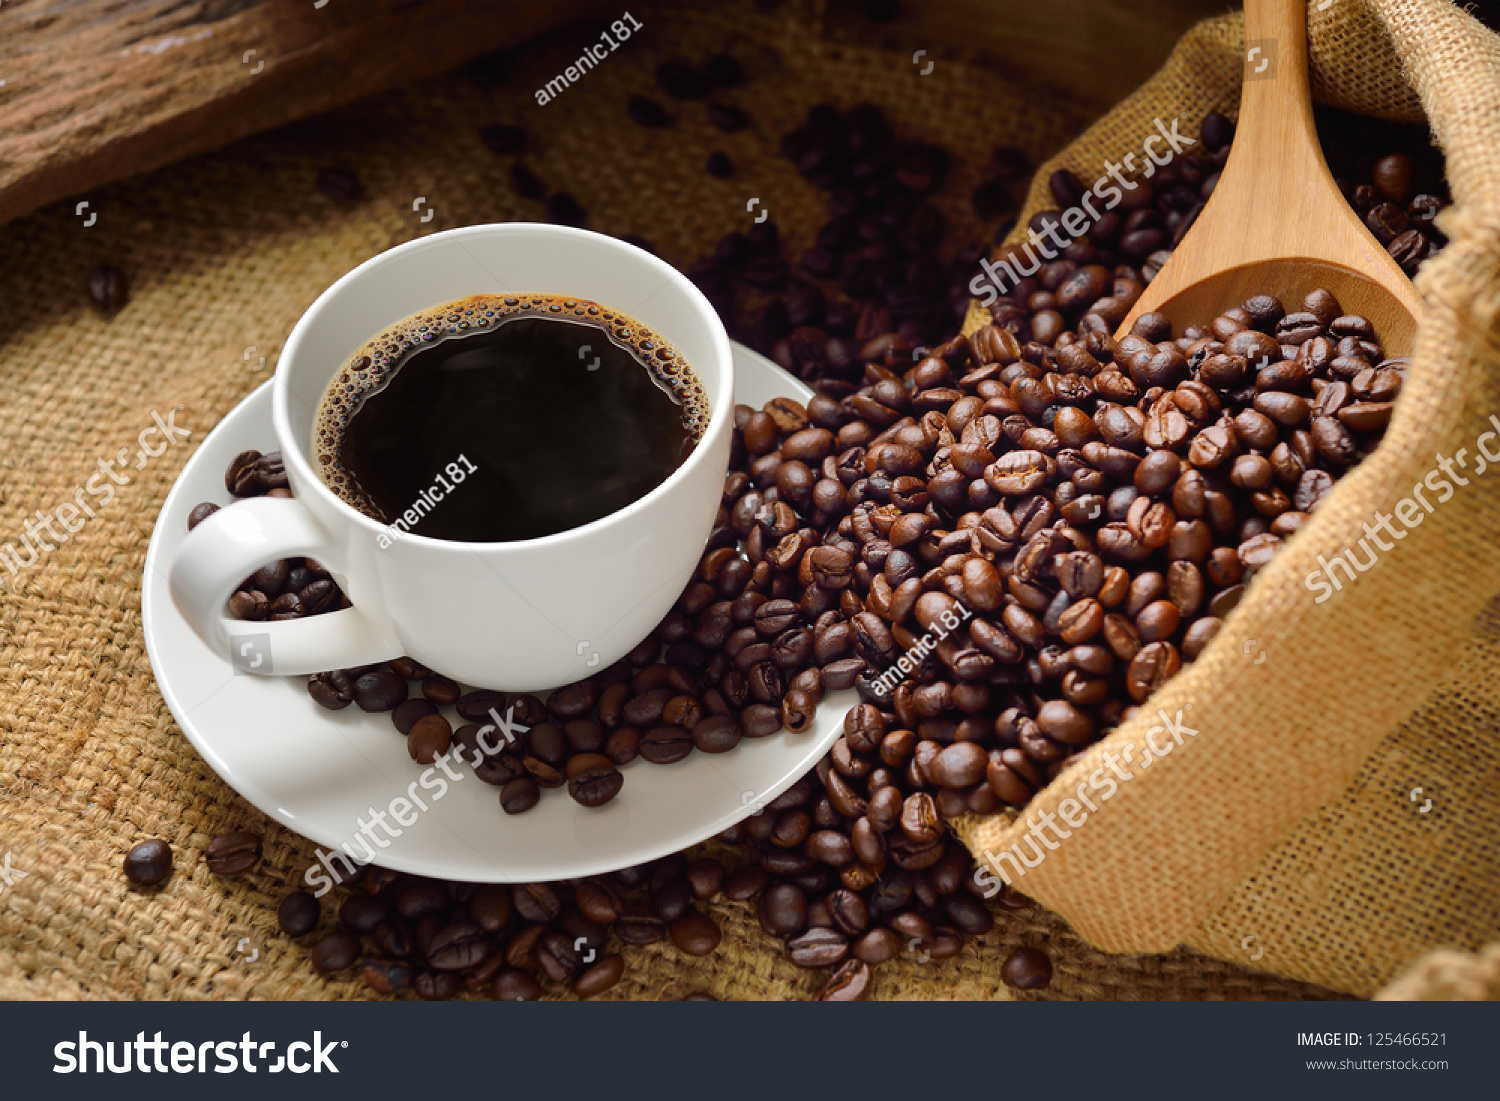 Coffee cup and coffee beans #125466521